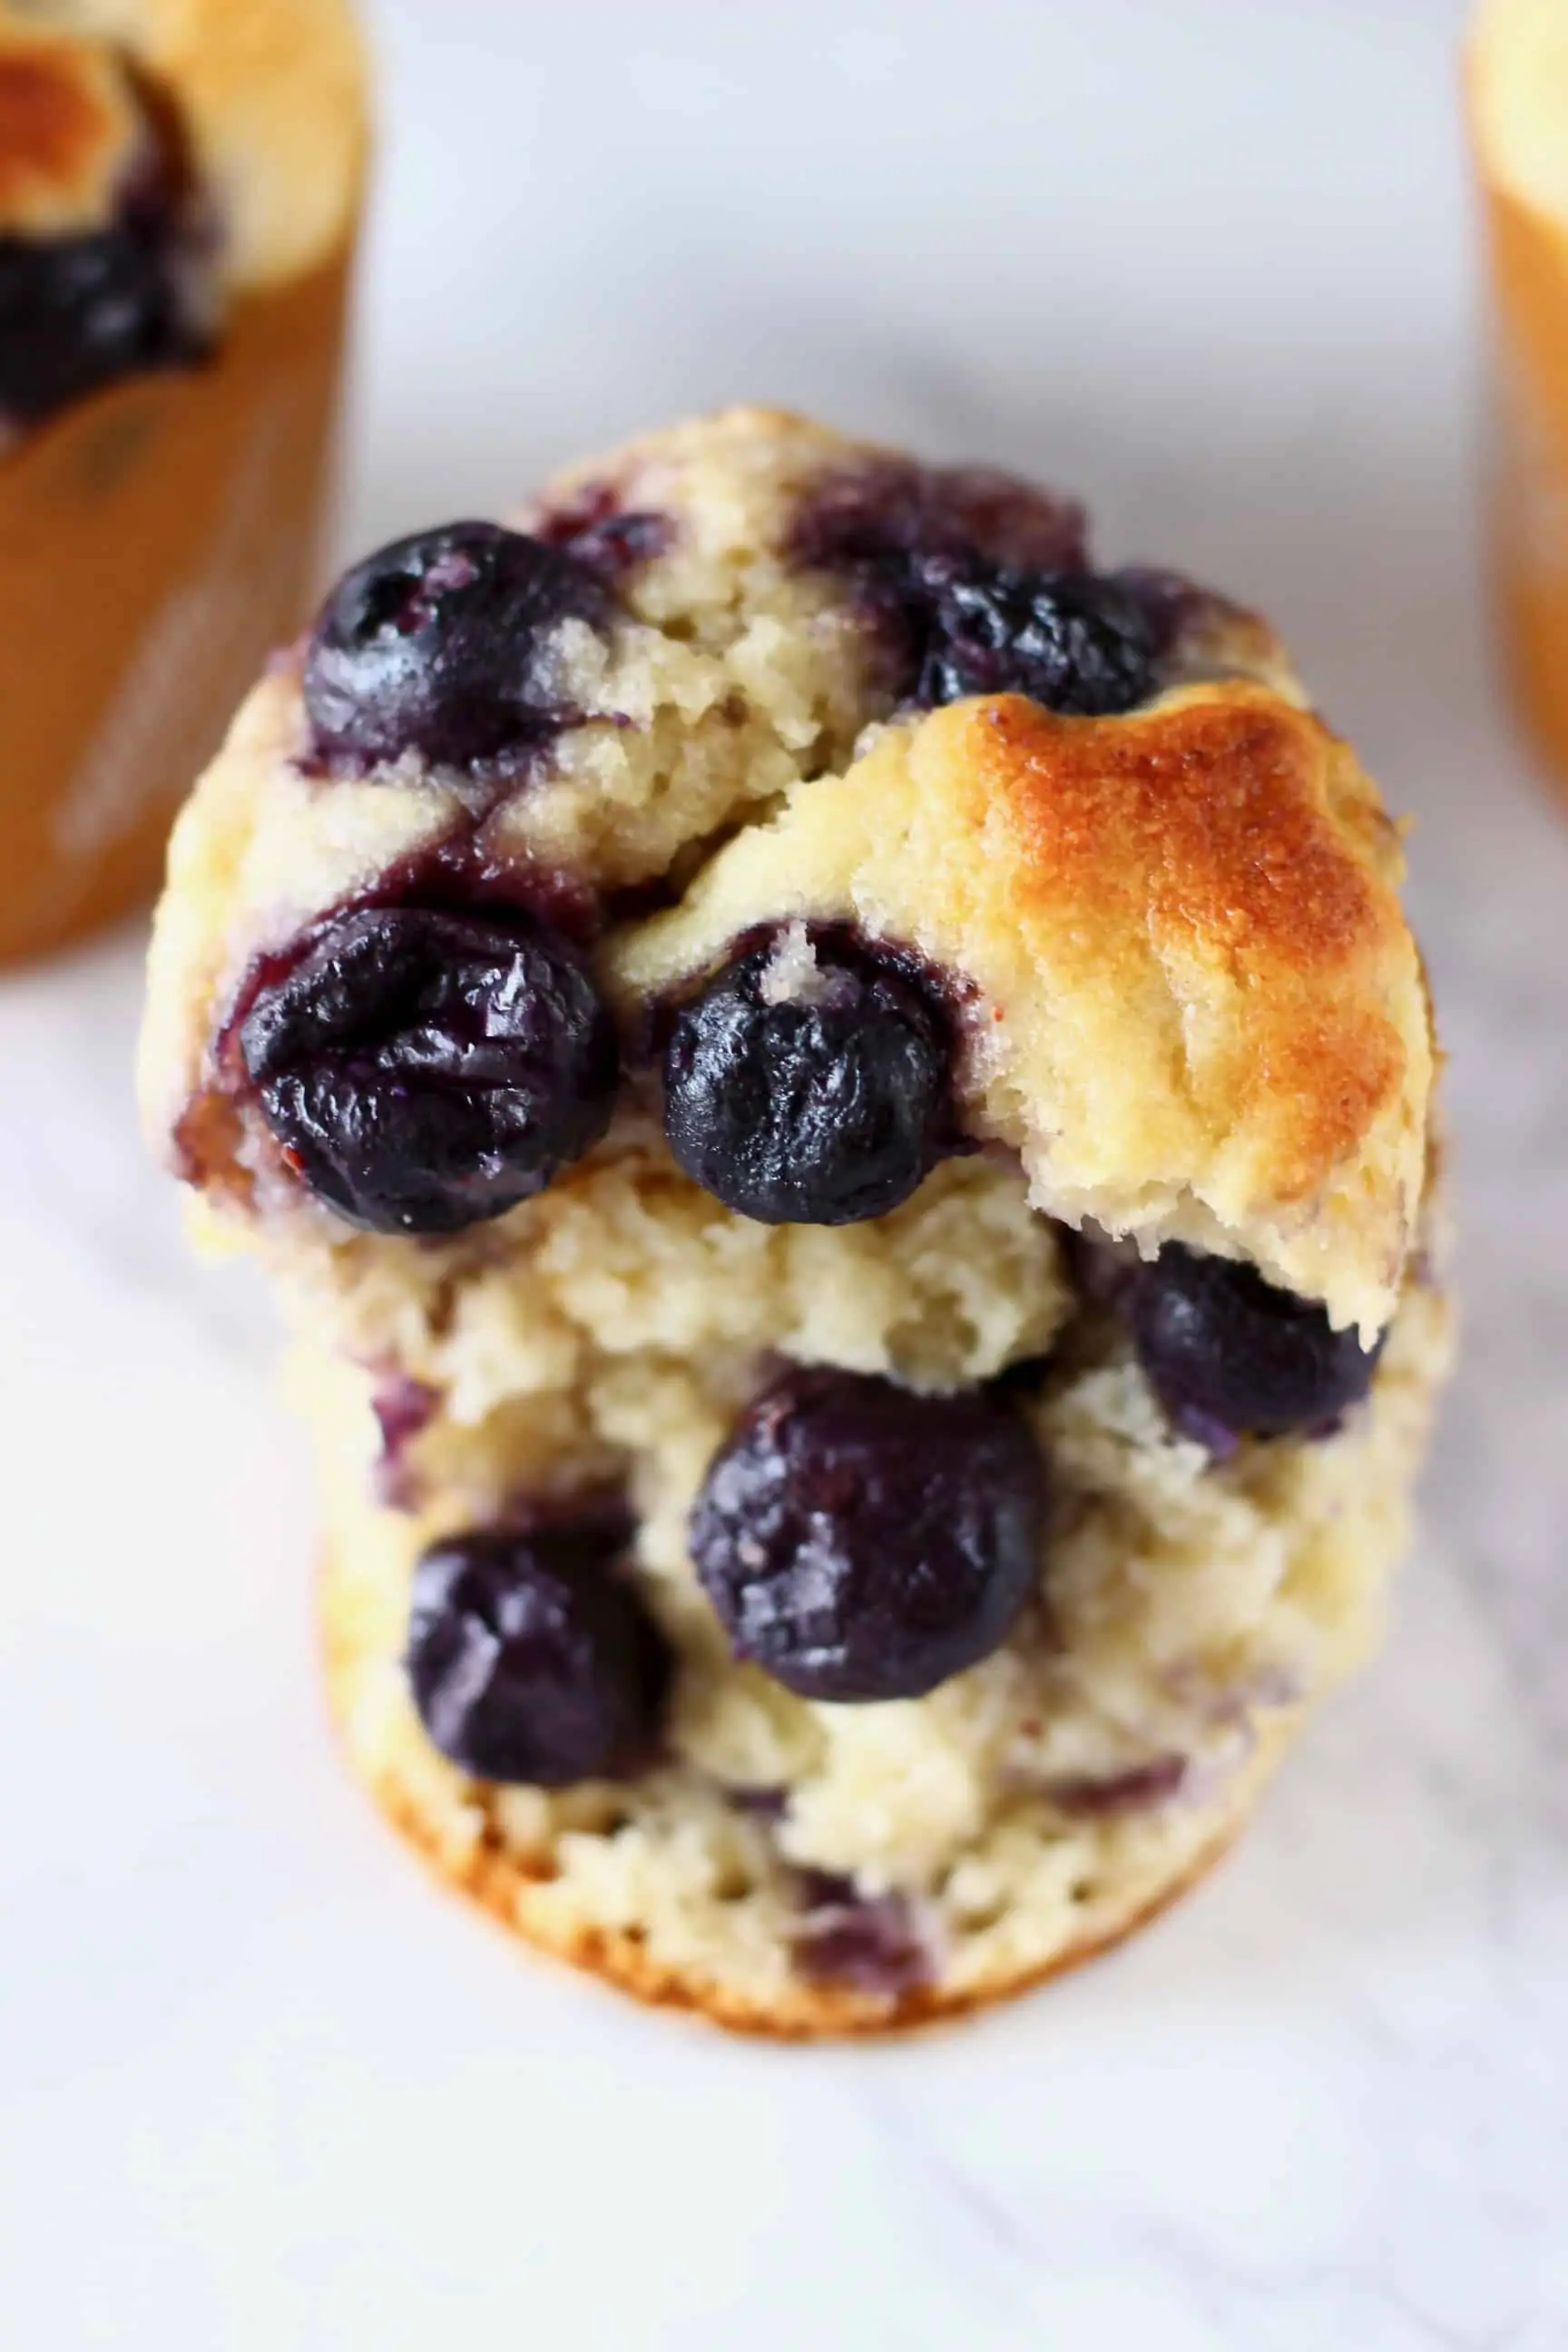 Half a gluten-free vegan blueberry banana muffin with two more muffins in the background